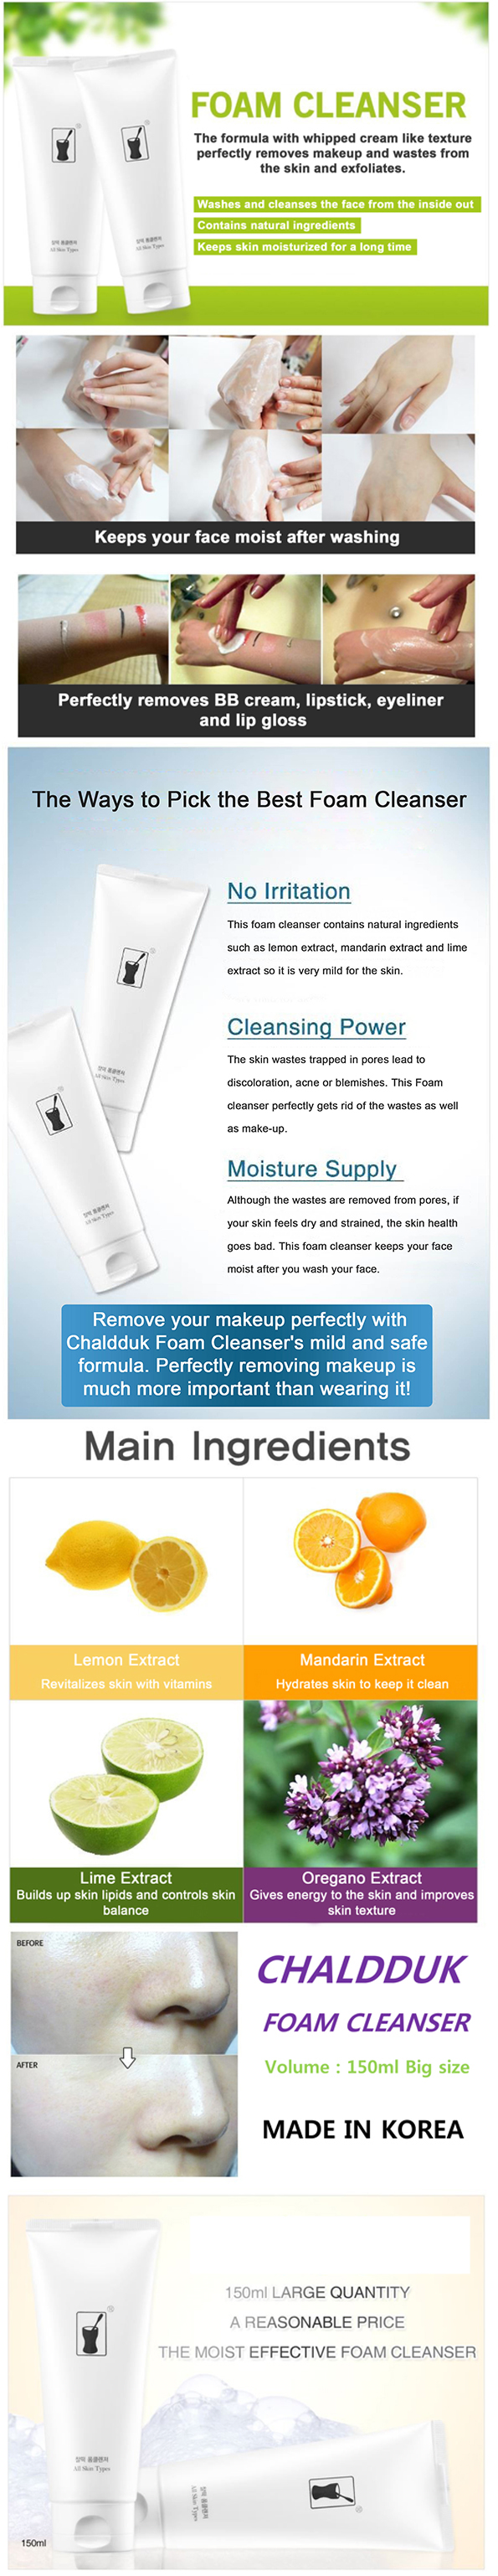 Chaldduk Facial Foam Cleanser (150 ml) is a KFDA approved non-irritating, natural foaming facial cleanser with a whipped cream like consistency that clears away dirt from inside the pores, removes excess oil and impurities without irritating or over-drying your skin. It is excellent for gentle skin exfoliation and make-up removal.  This foam cleanser has a blend of fruit and plant extracts such as lemon, lime, mandarin and oregano extracts so it is mild and safe to use.  Lemon extract contains citric acids that cleanse, lighten and brighten the skin, It also removes dead skin and stimulate new skin growth. Lime extract help smooth skin tone and reduce the appearance of dark spots. It builds up skin lipids that keeps moisture in tact and dirt and impurities out. Mandarin extract has antioxidants that help skin resist the damage caused by the sun and free radicals. It also reduces the sign of aging like wrinkles, fine lines and blemishes while oregano extract heal itches and skin irritations.  SKIN BENEFITS:          Rinses away dirt, oil, and impurities         Unclogs pores         Keeps skin hydrated and moisturized         Removes stubborn make-up like mascara, eye liner and lipstick         Leaves clean feel         Has natural ingredients         Hypoallergenic     HOW TO USE:  Wet face, massage into the skin using fingertips, then rinse away with water. May be used in morning or in the evening. Gentle enough for everyday use.     Chaldduk natural foam facial cleanser leaves your face clean, healthy and moisturized for a long time.